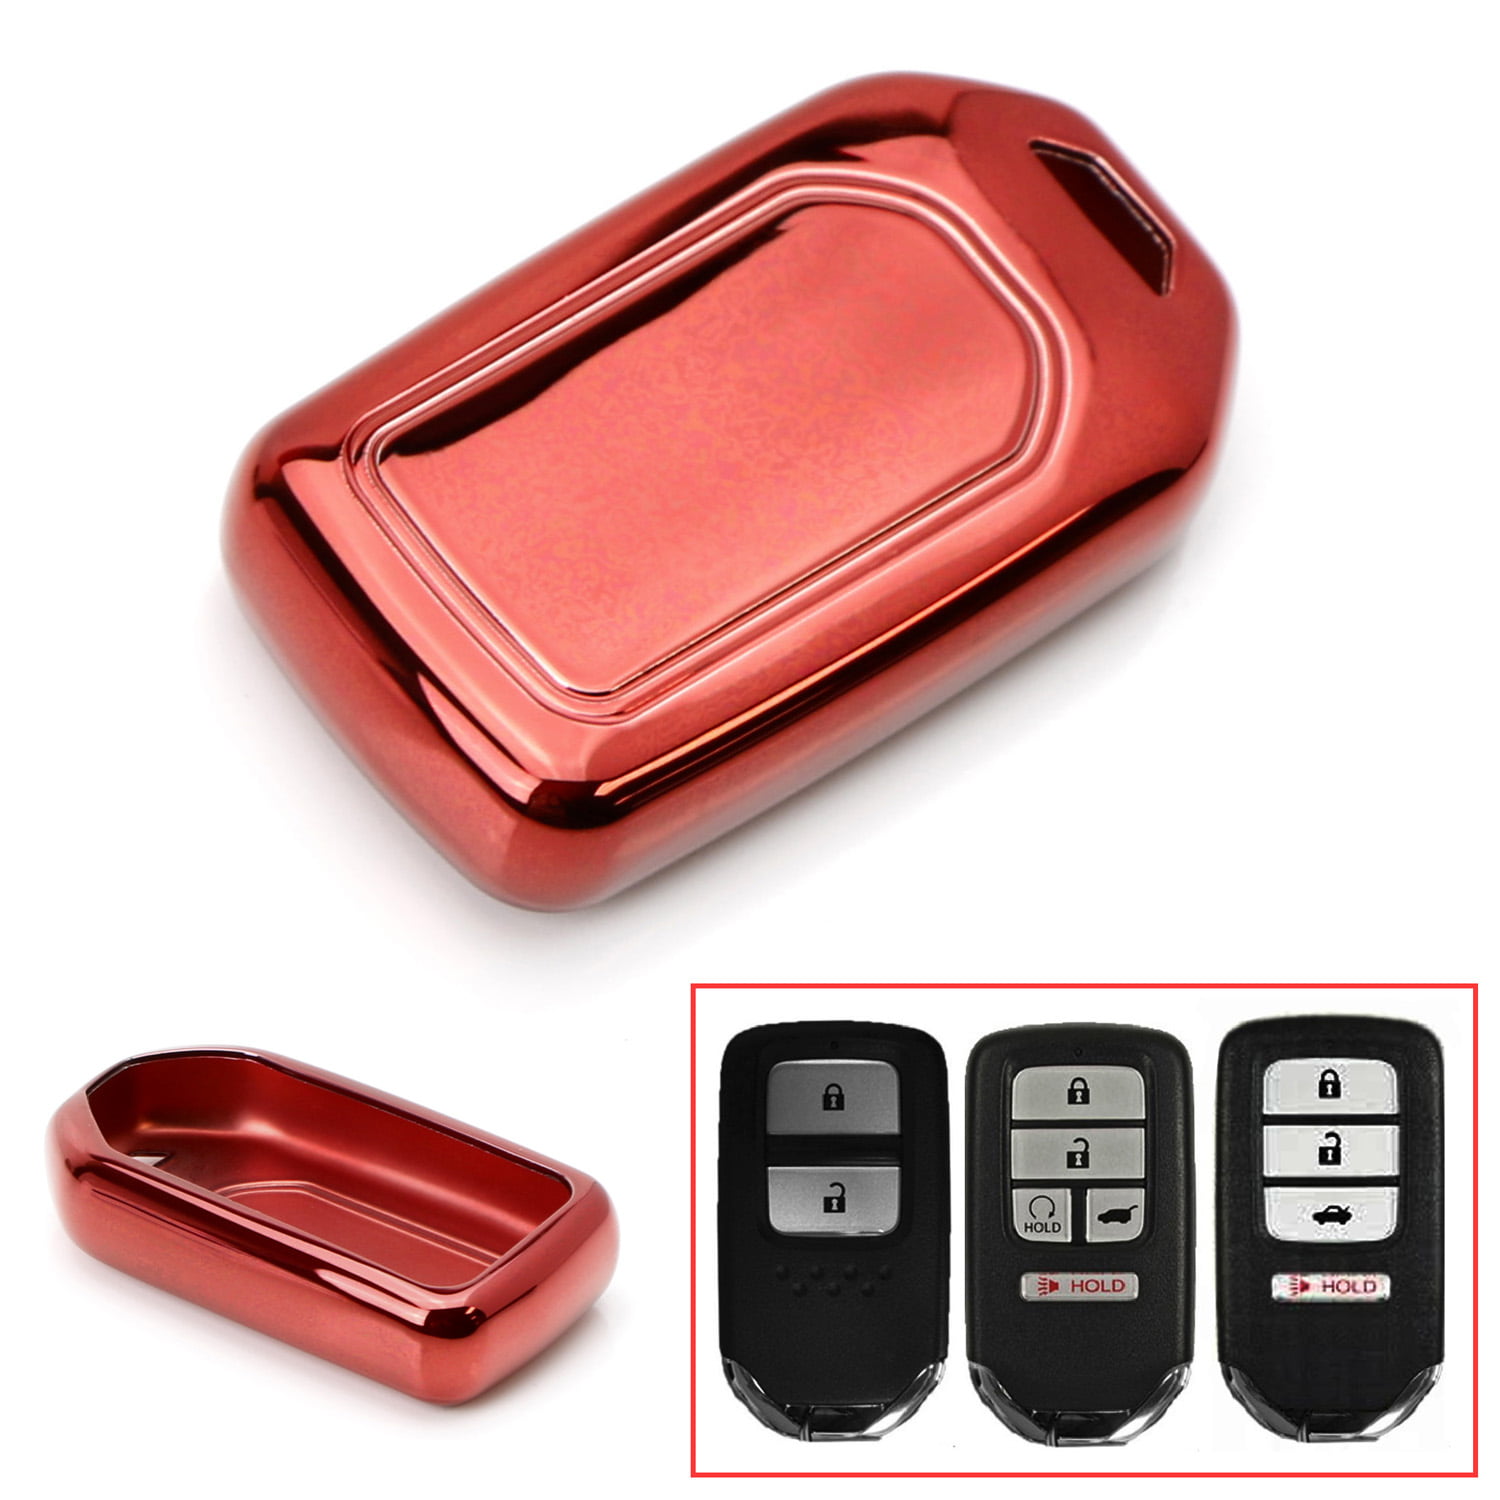 Green Smart Fob Remote Key Case Cover Jacket Holder Protector for Freed 2015 2016 2017 2018 Honda Fit Accord Civic Pilot 433MHz ID47